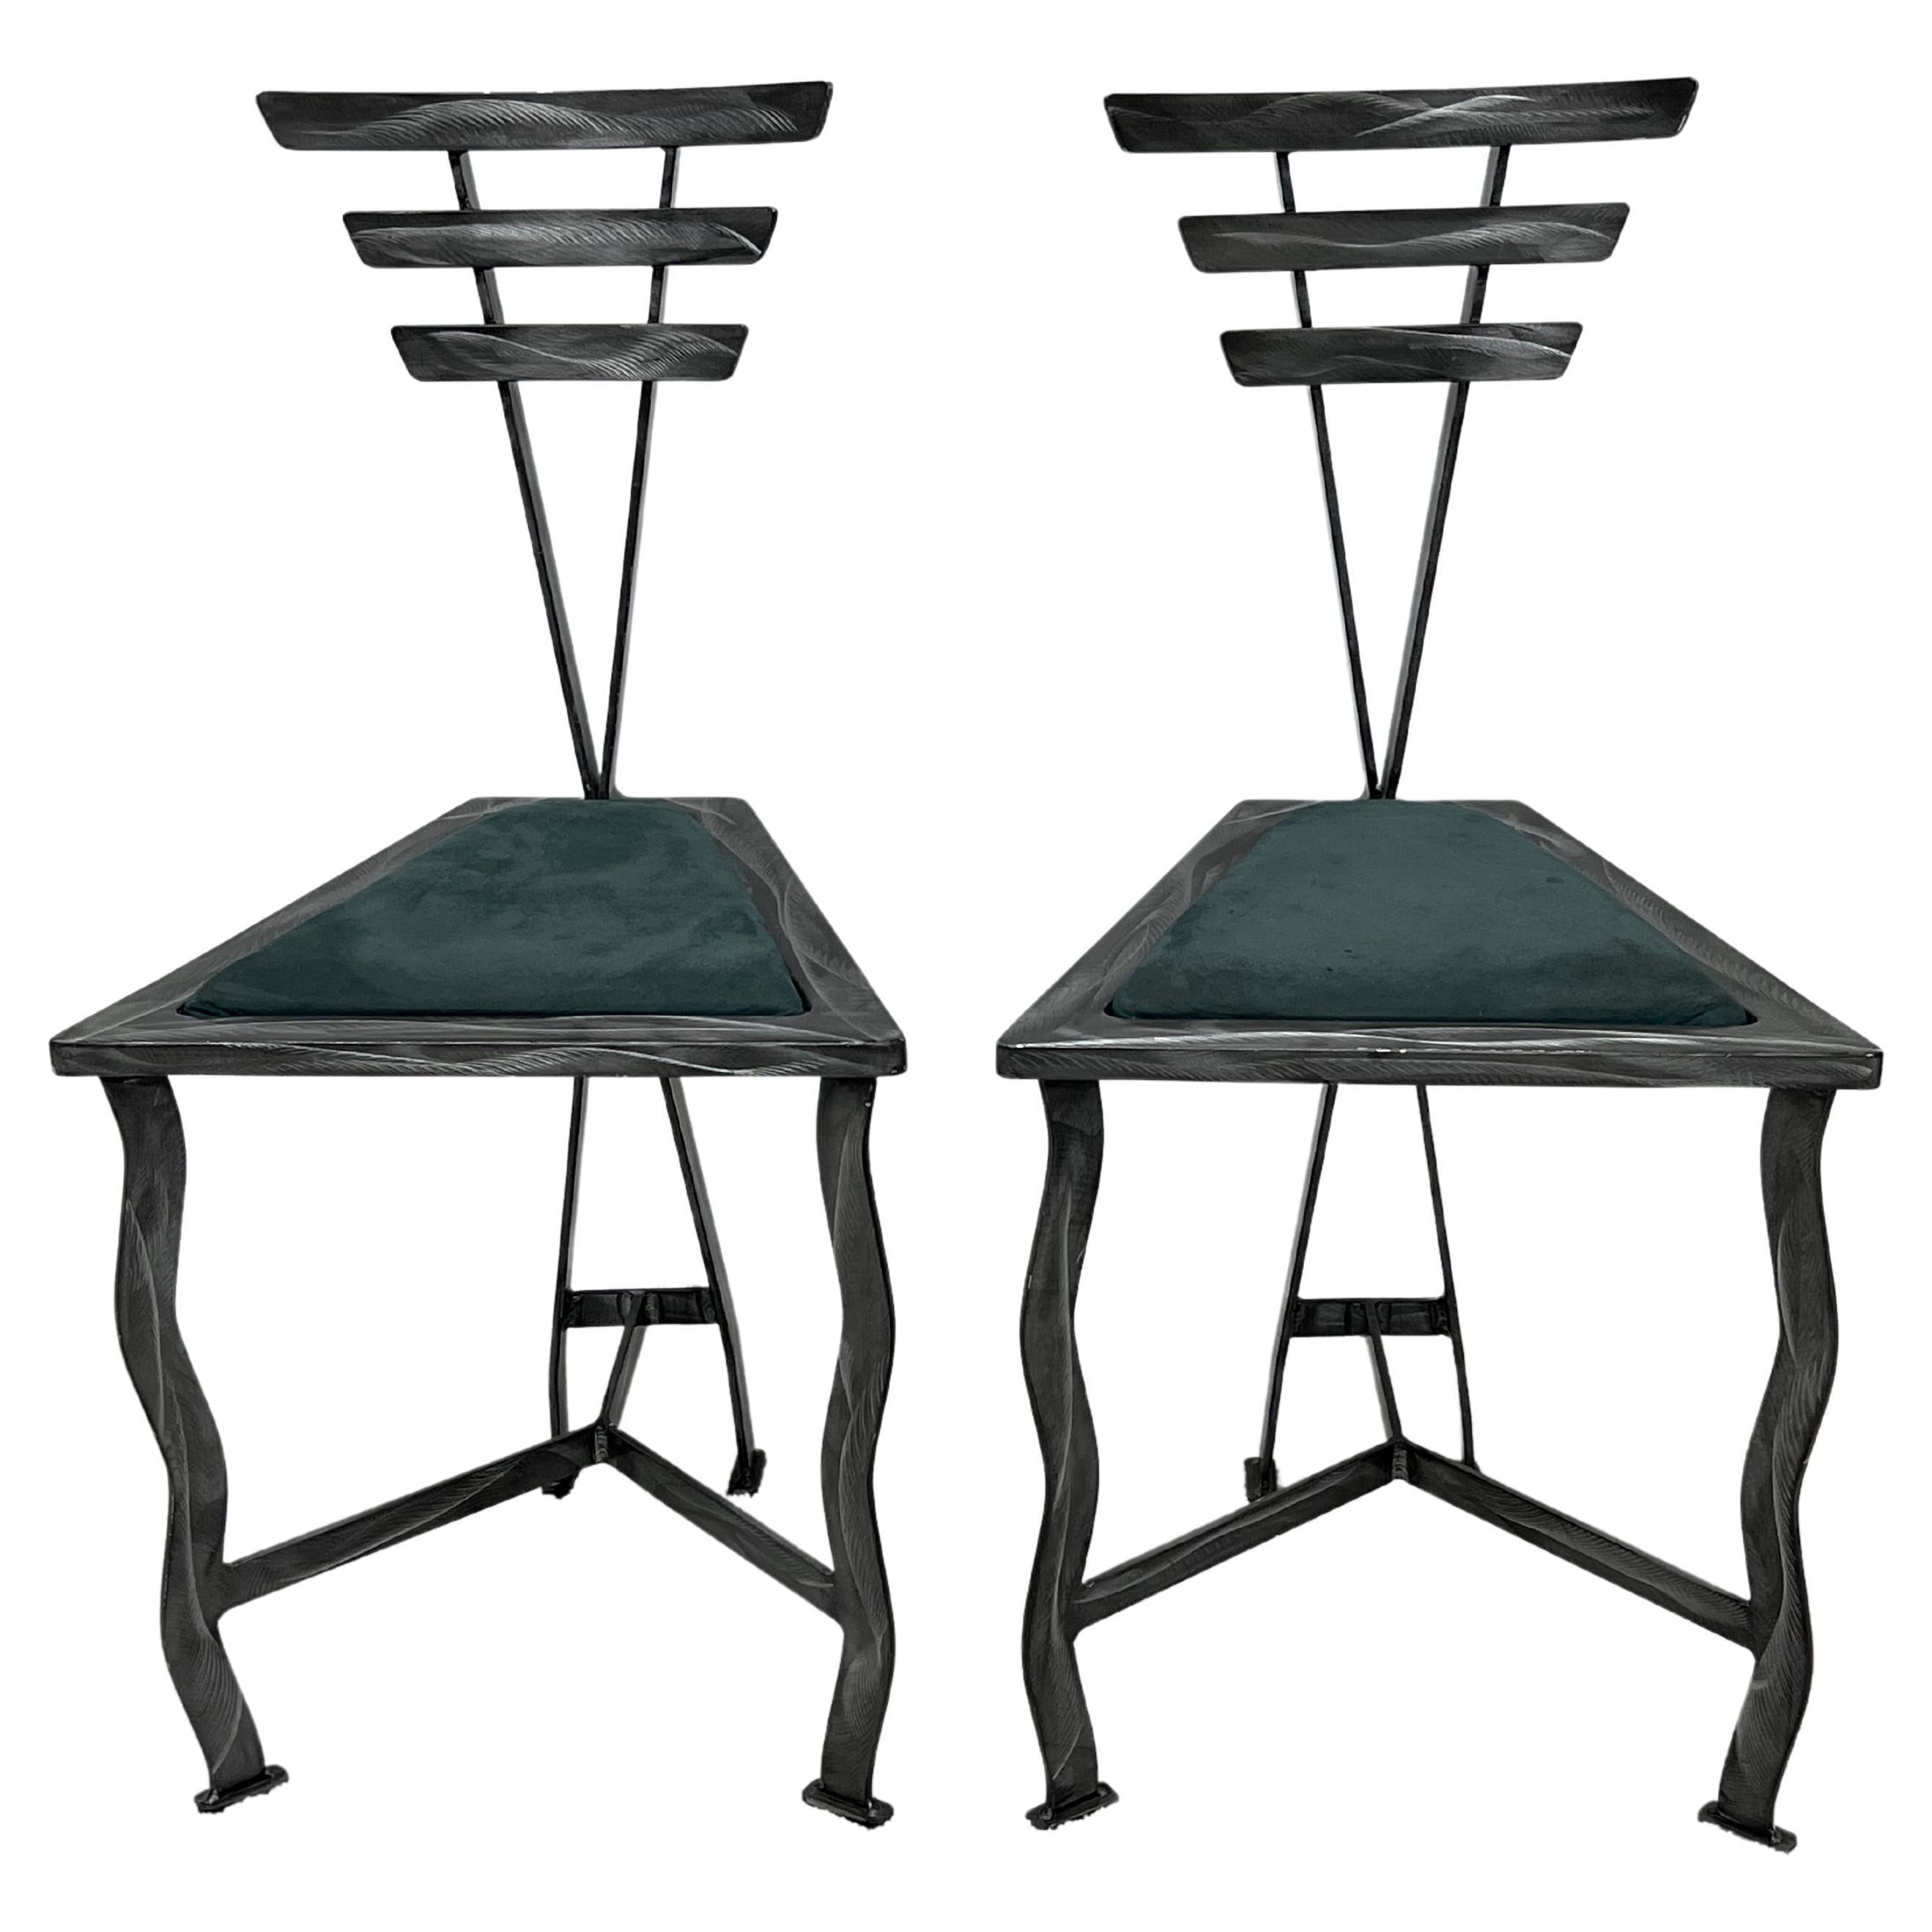 90s Postmodern Contemporary Welded Steel Studio Side Chairs, a Pair For Sale